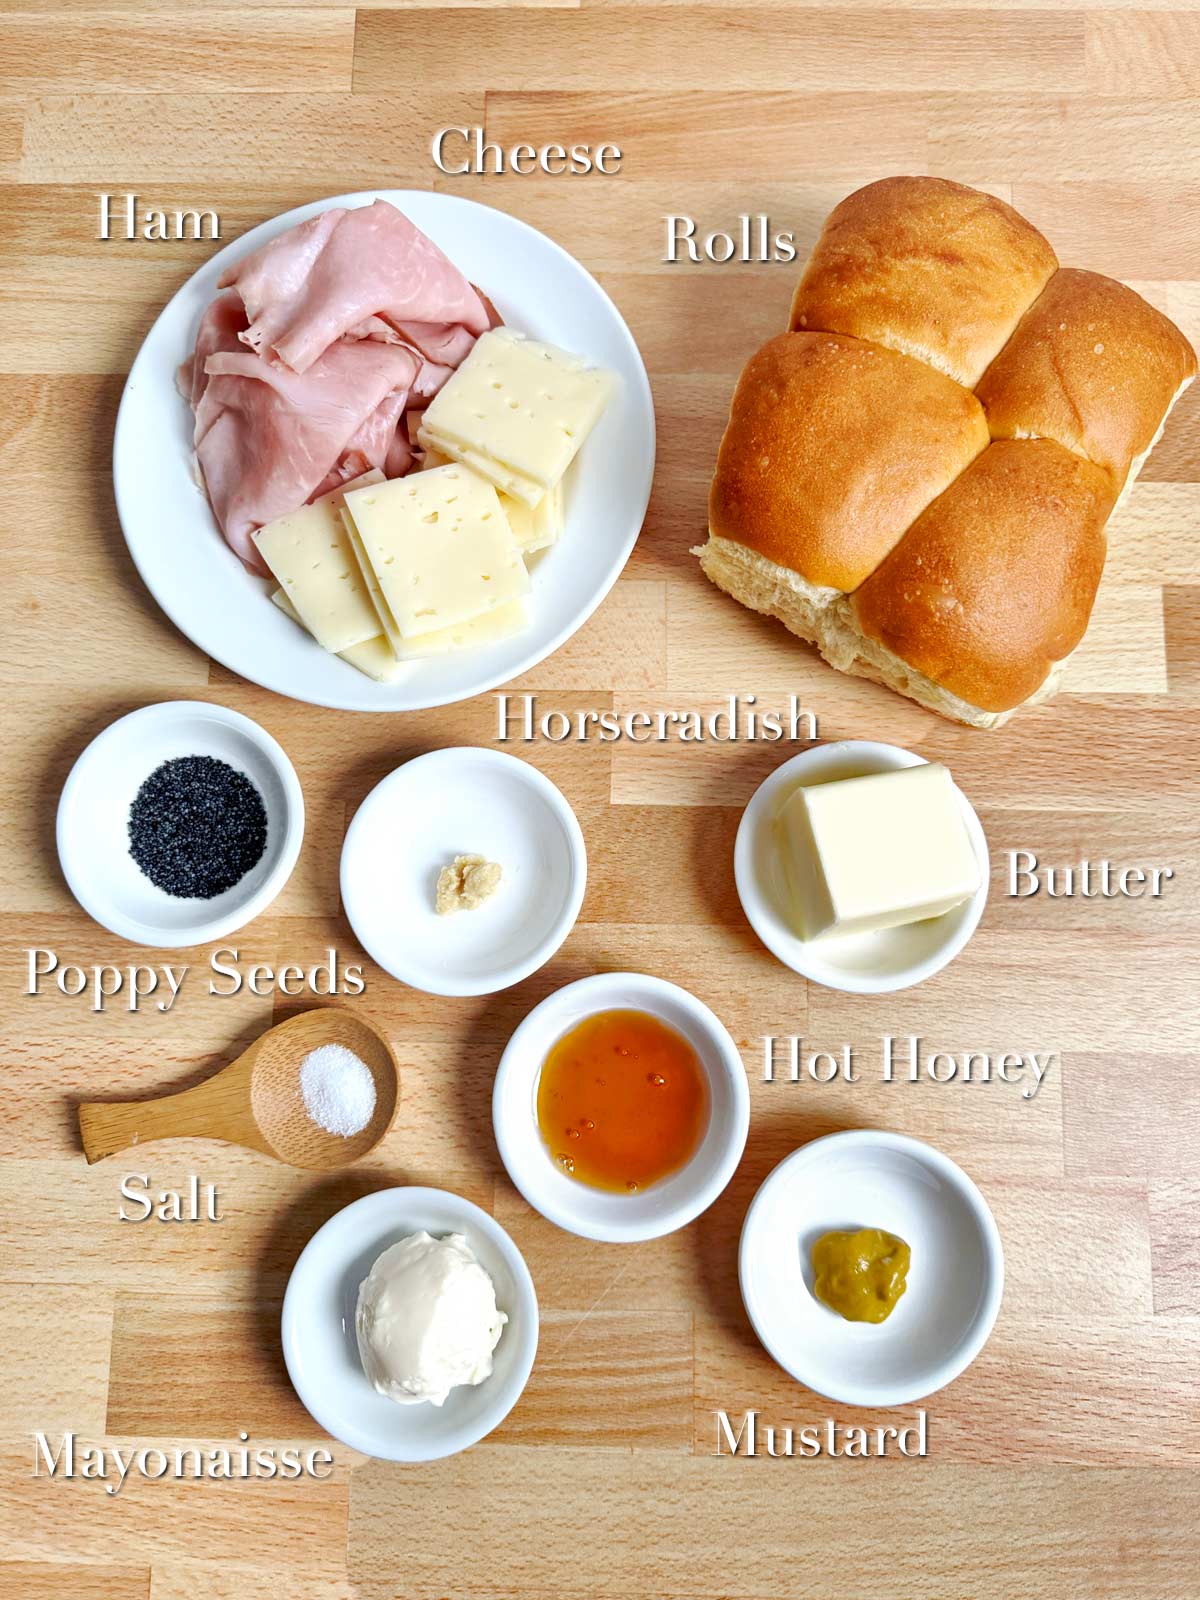 Ingredients for a ham and cheese sandwich on a wooden table.